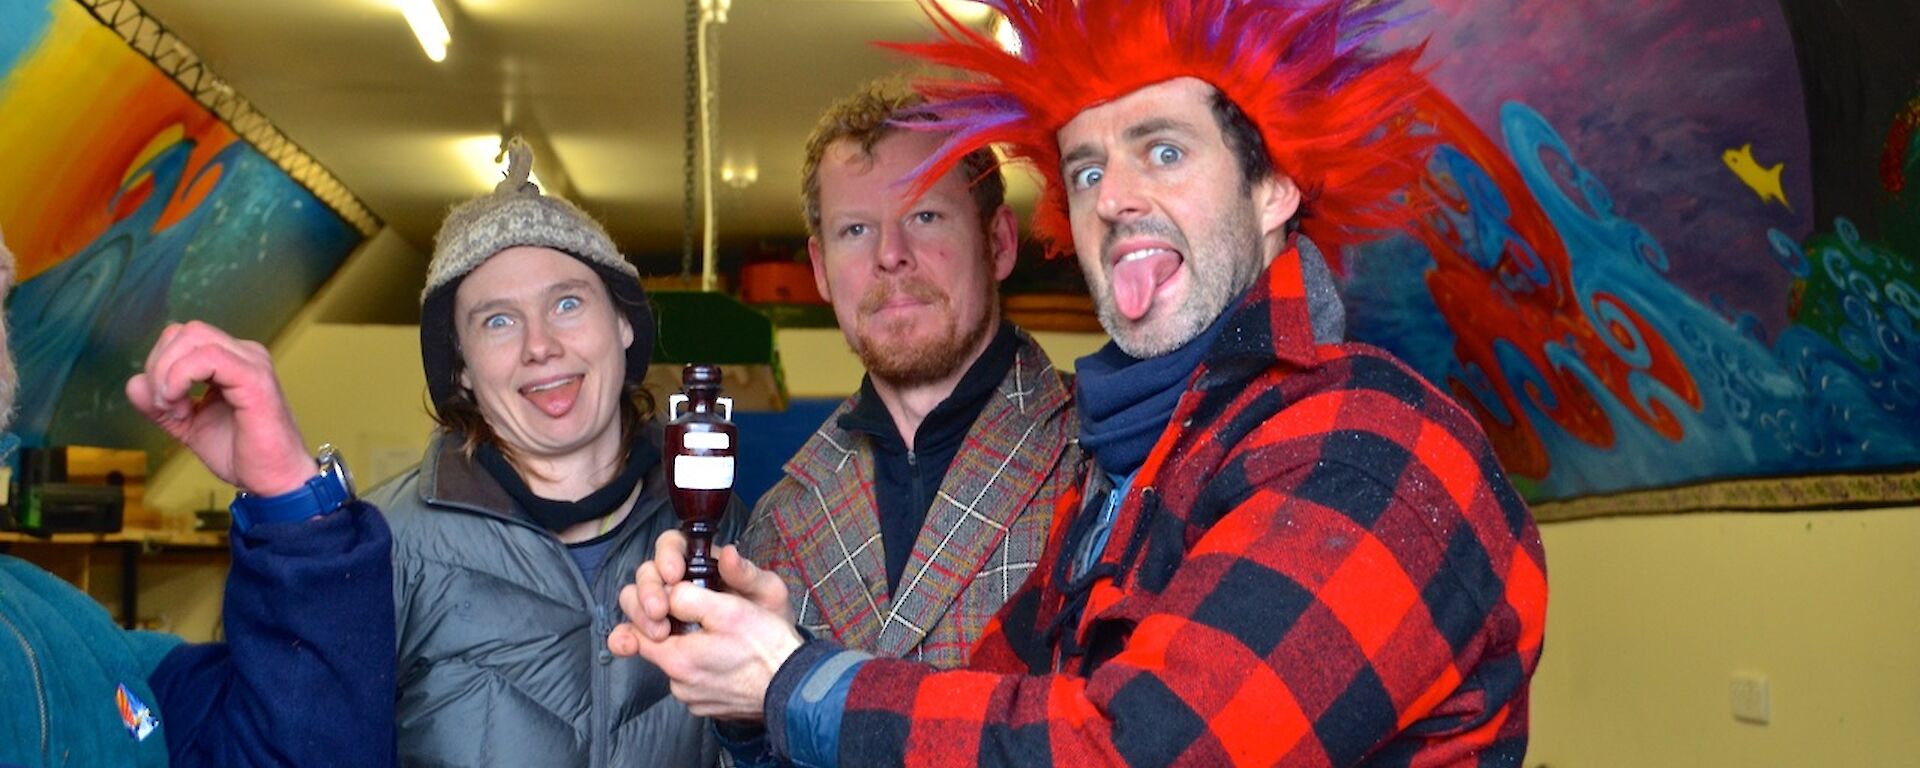 Nick (mostly out of picture) Angela, Mike and Steve (with a red and purple mohawk wig) performing the Haka. Steve is holding the tug-o-war trophy; a replica of the ‘ashes’ urn.